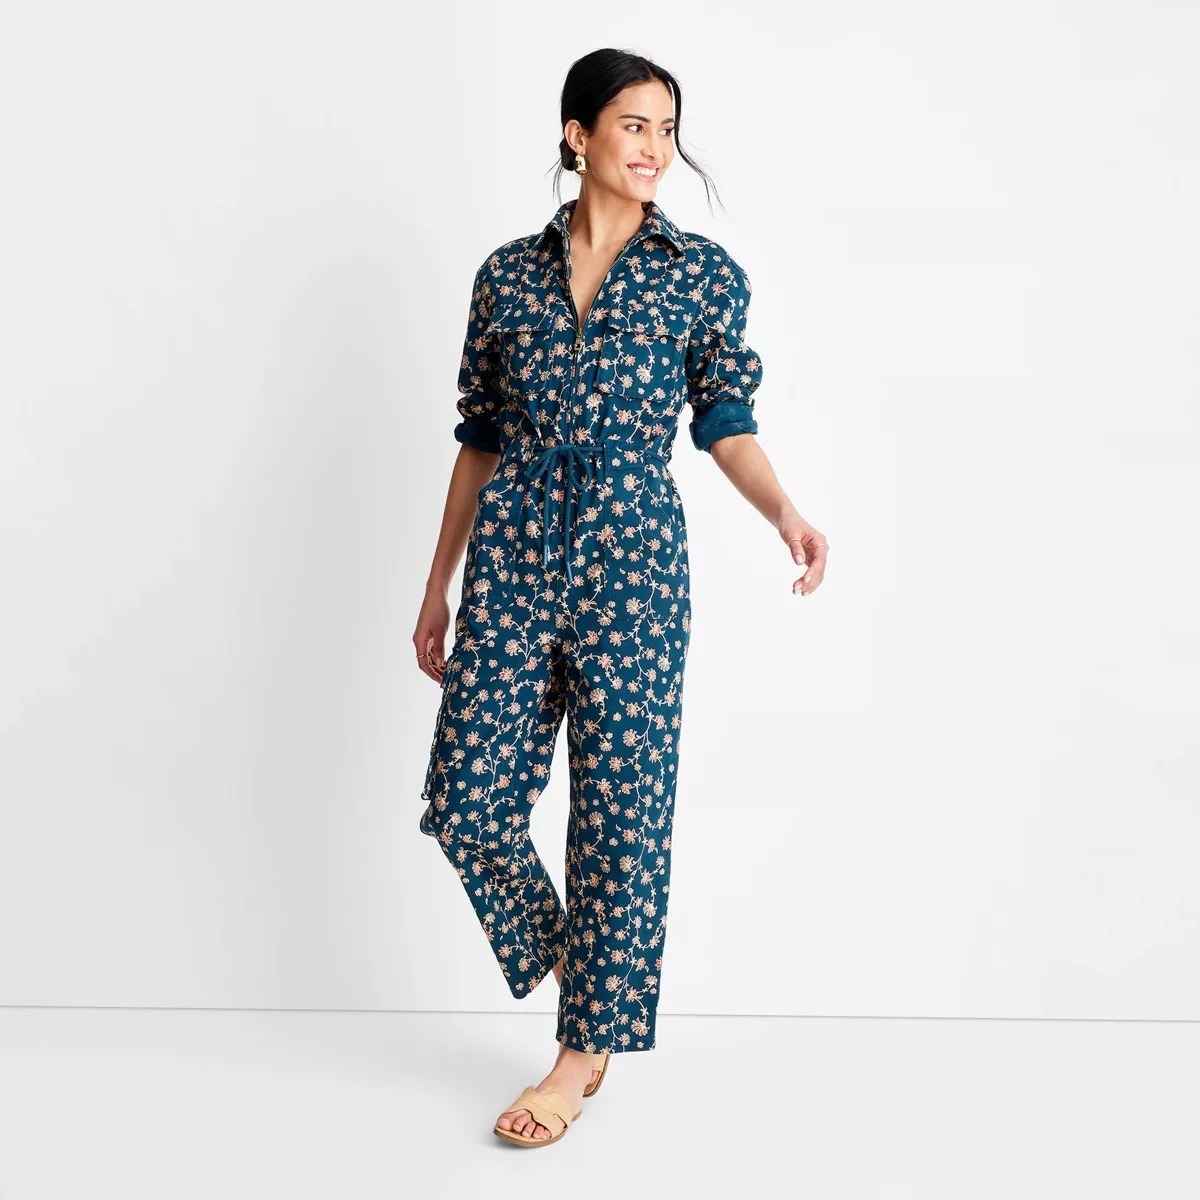 Model in a dark blue boilersuit with small light colored flowers printed all over it